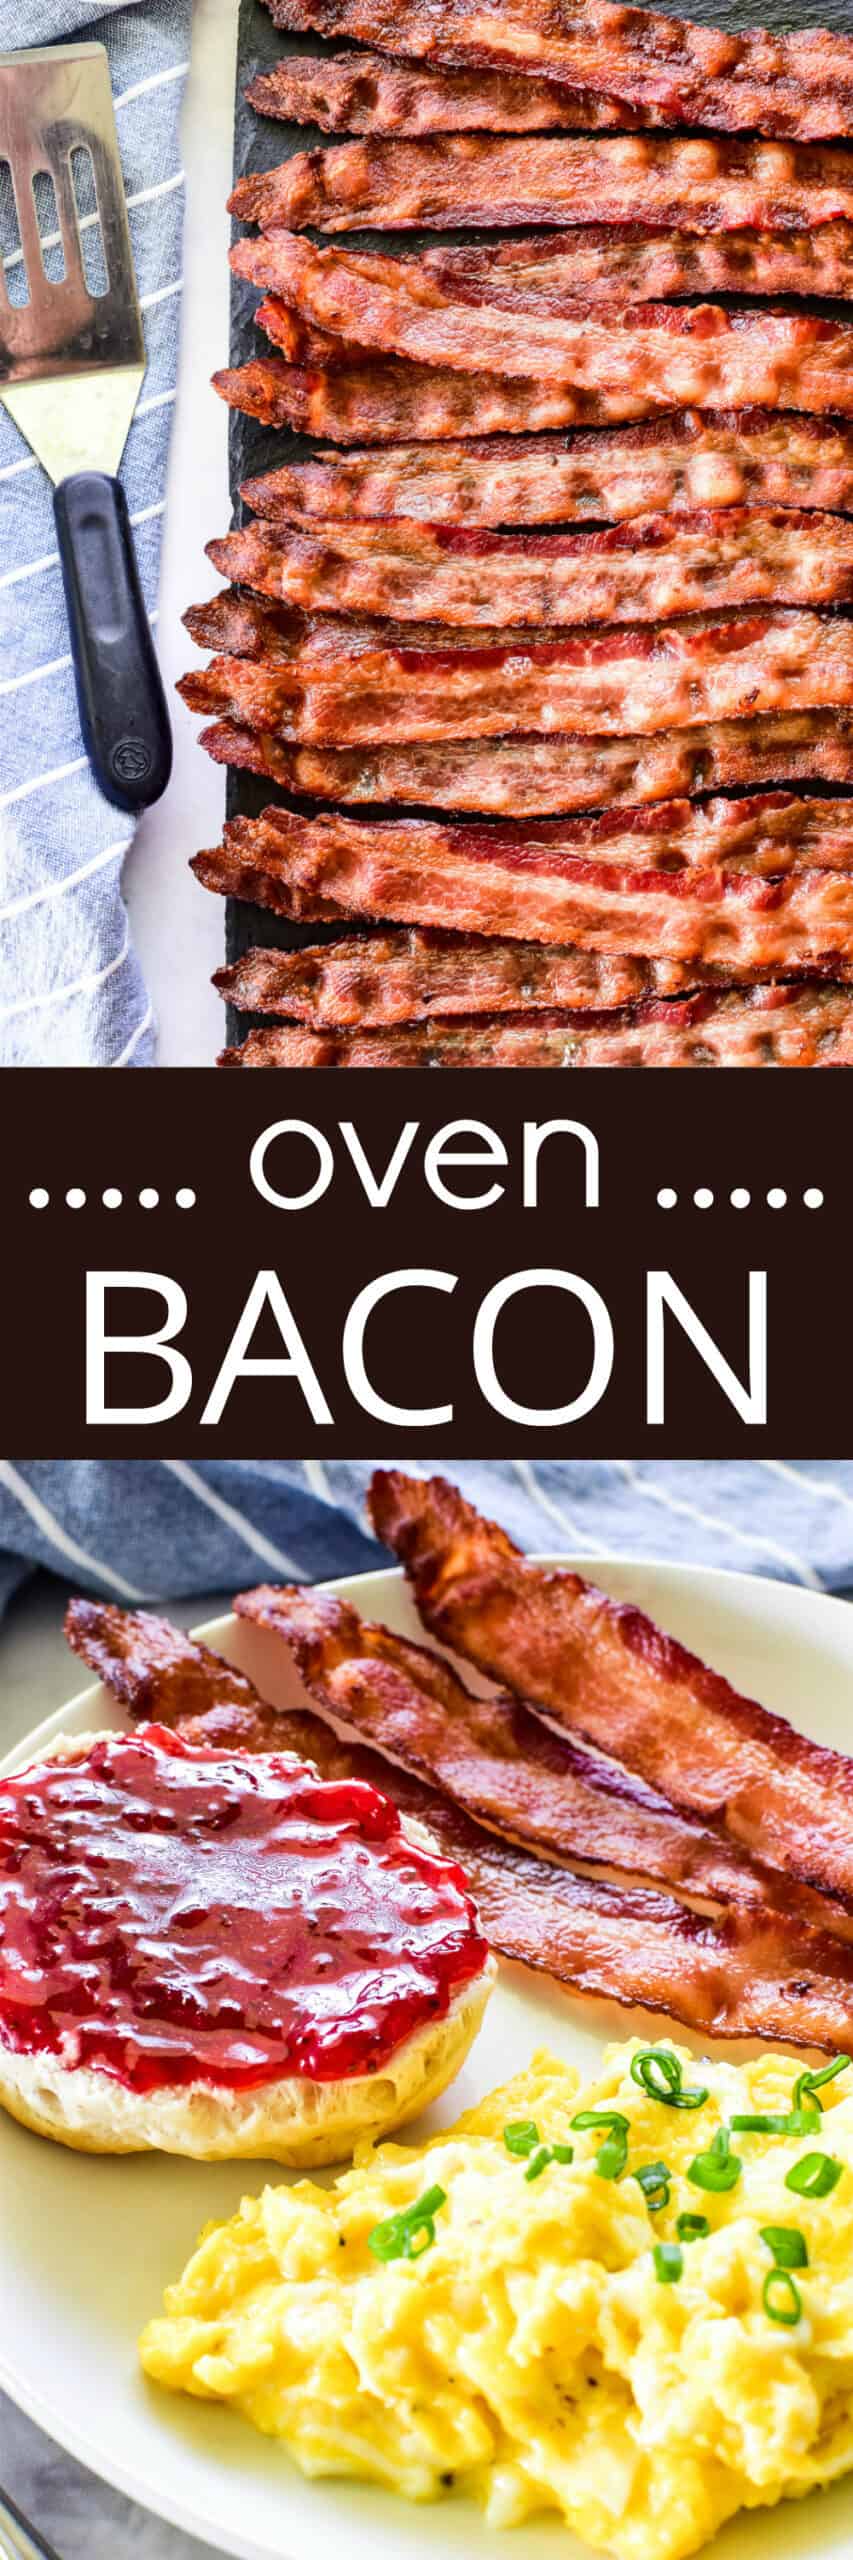 Collage image of Oven Bacon 